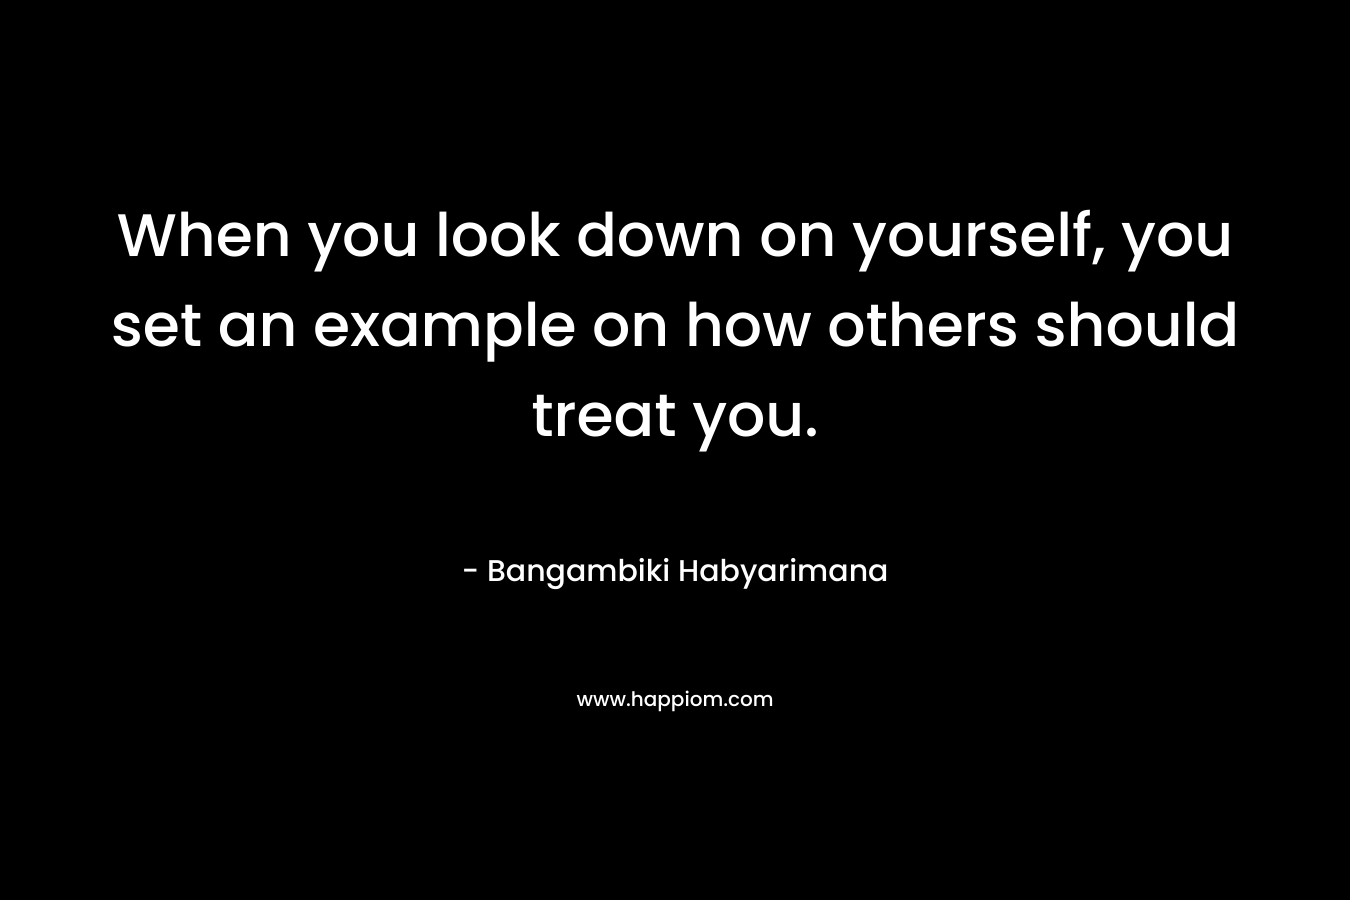 When you look down on yourself, you set an example on how others should treat you.